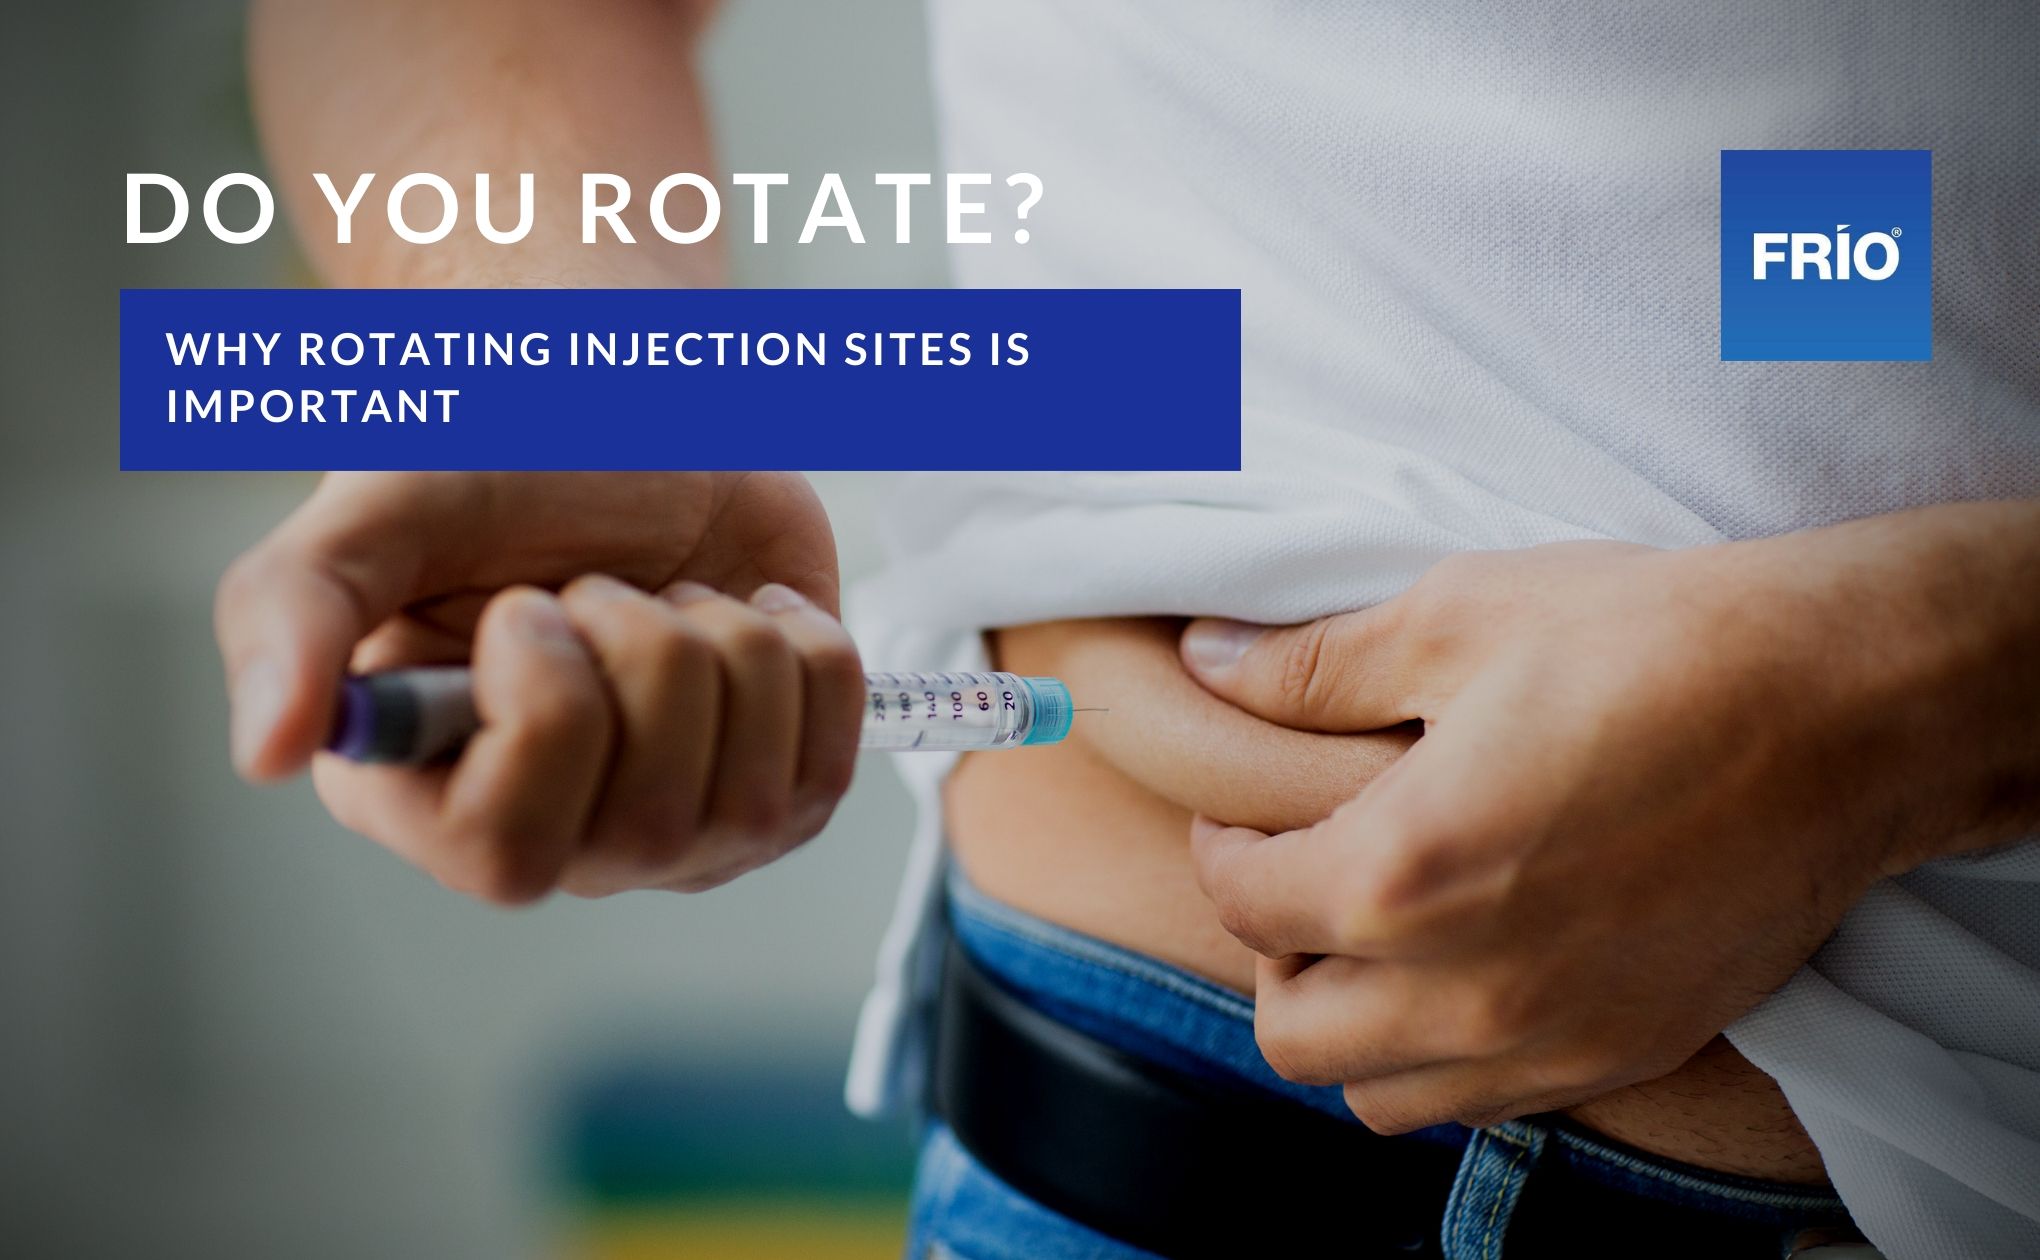 Do you rotate your injection sites?